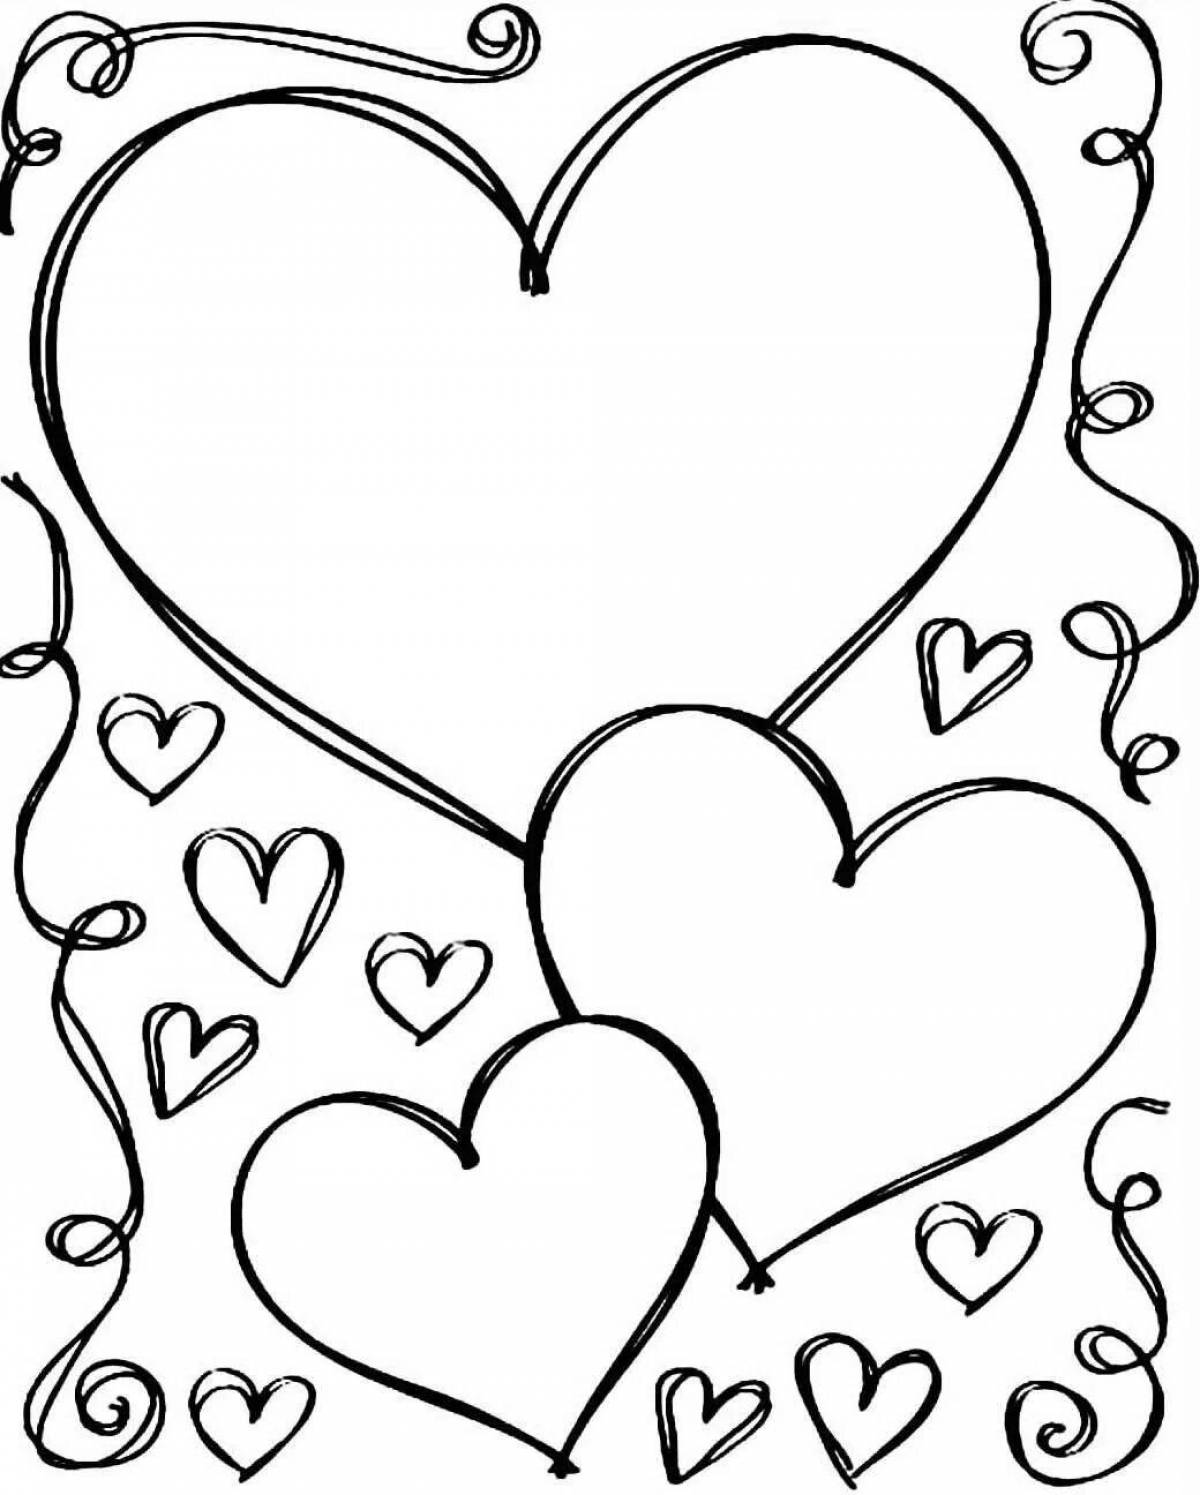 Exciting valentine's coloring book for kids